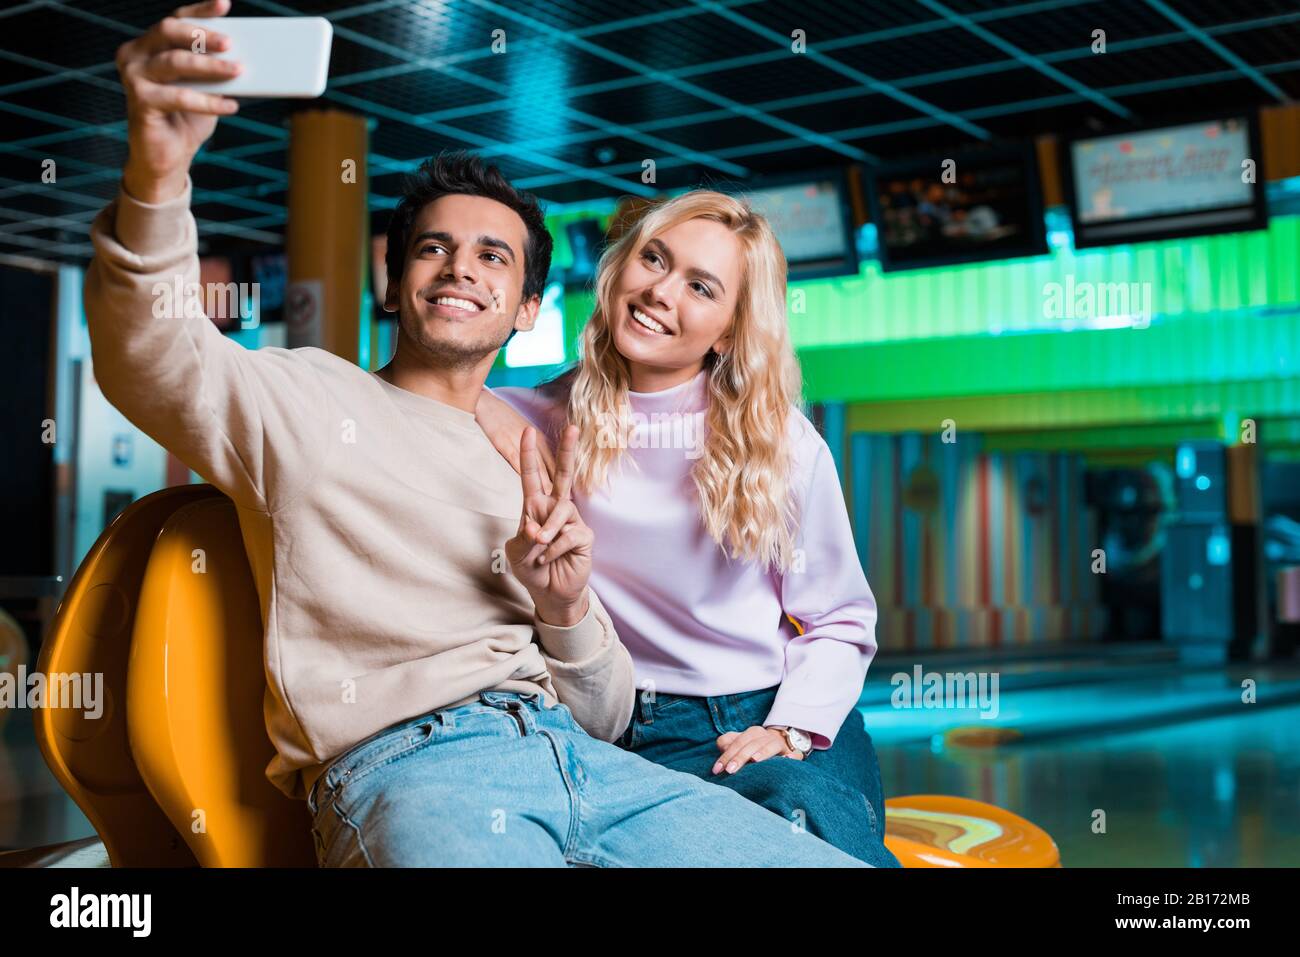 happy young man showing victory gesture while sitting in bowilng club and taking selfie with smiling girlfriend Stock Photo